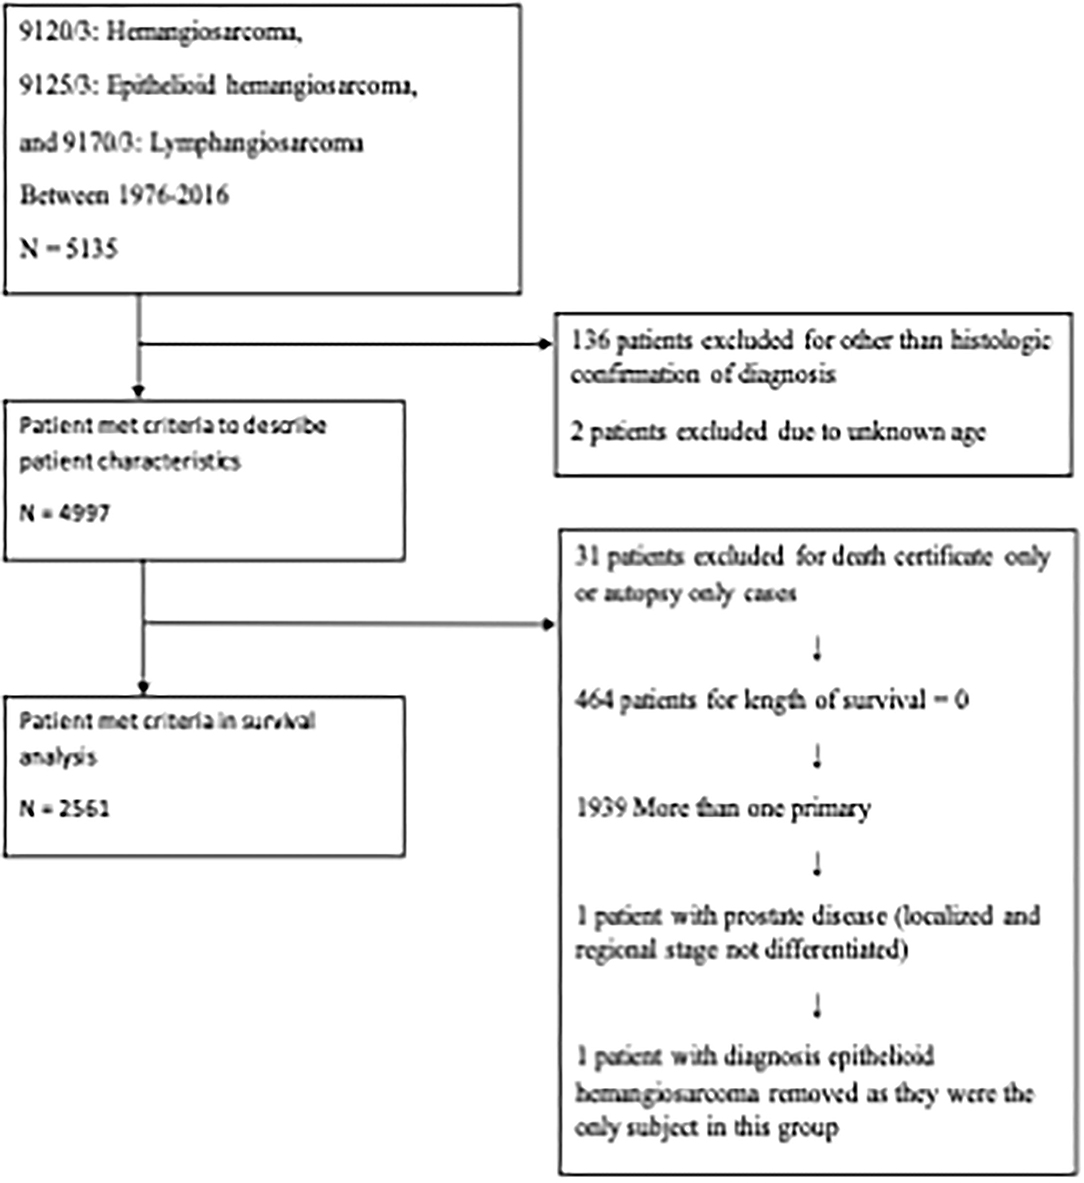 Frontiers | Outcomes of Interventions for Angiosarcoma